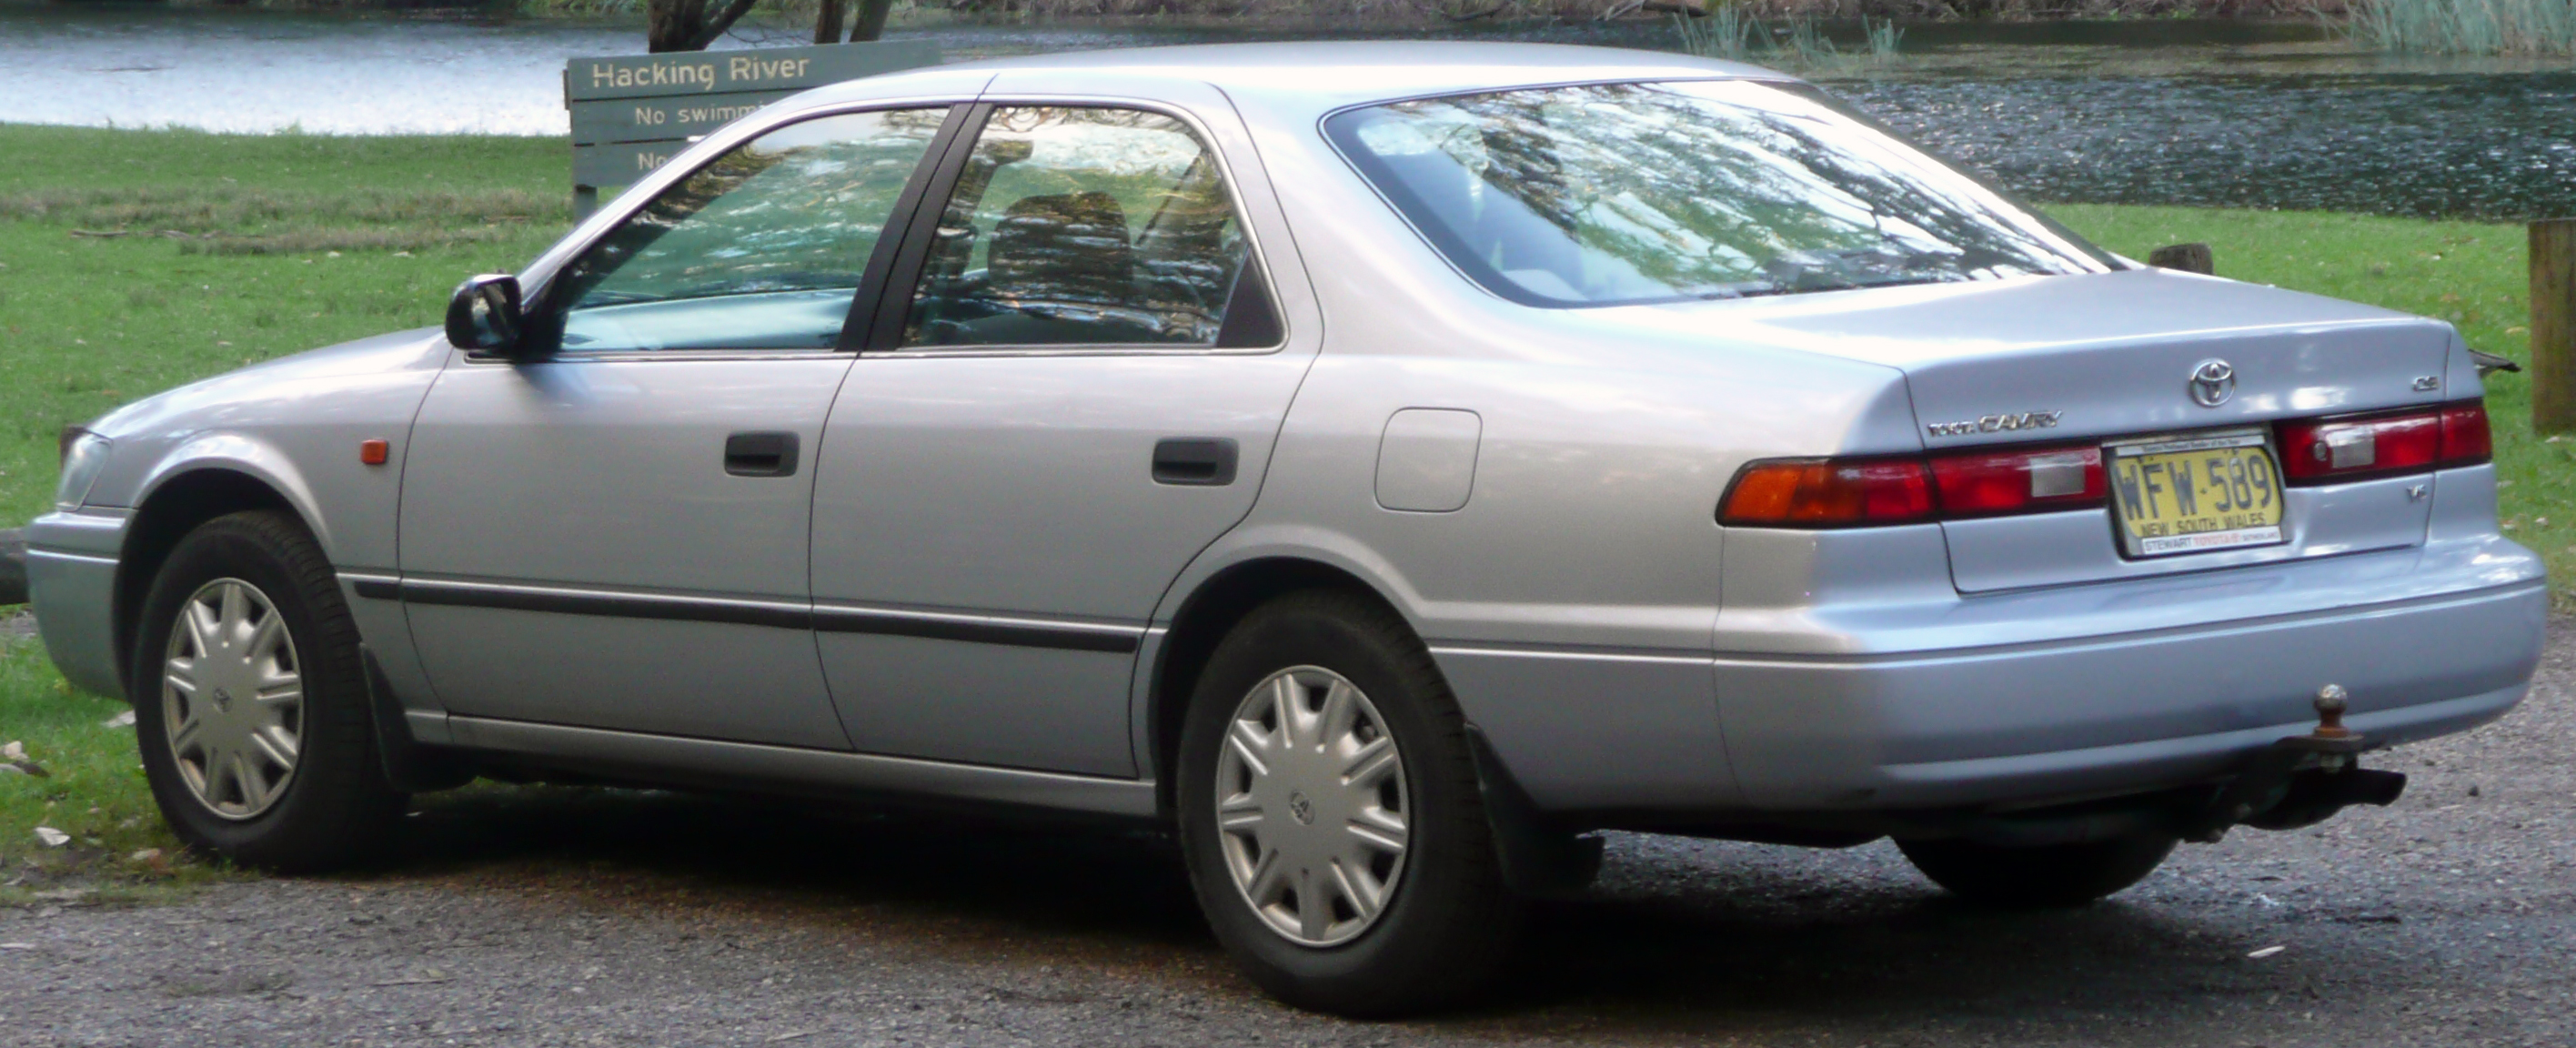 1997-toyota-camry-information-and-photos-momentcar